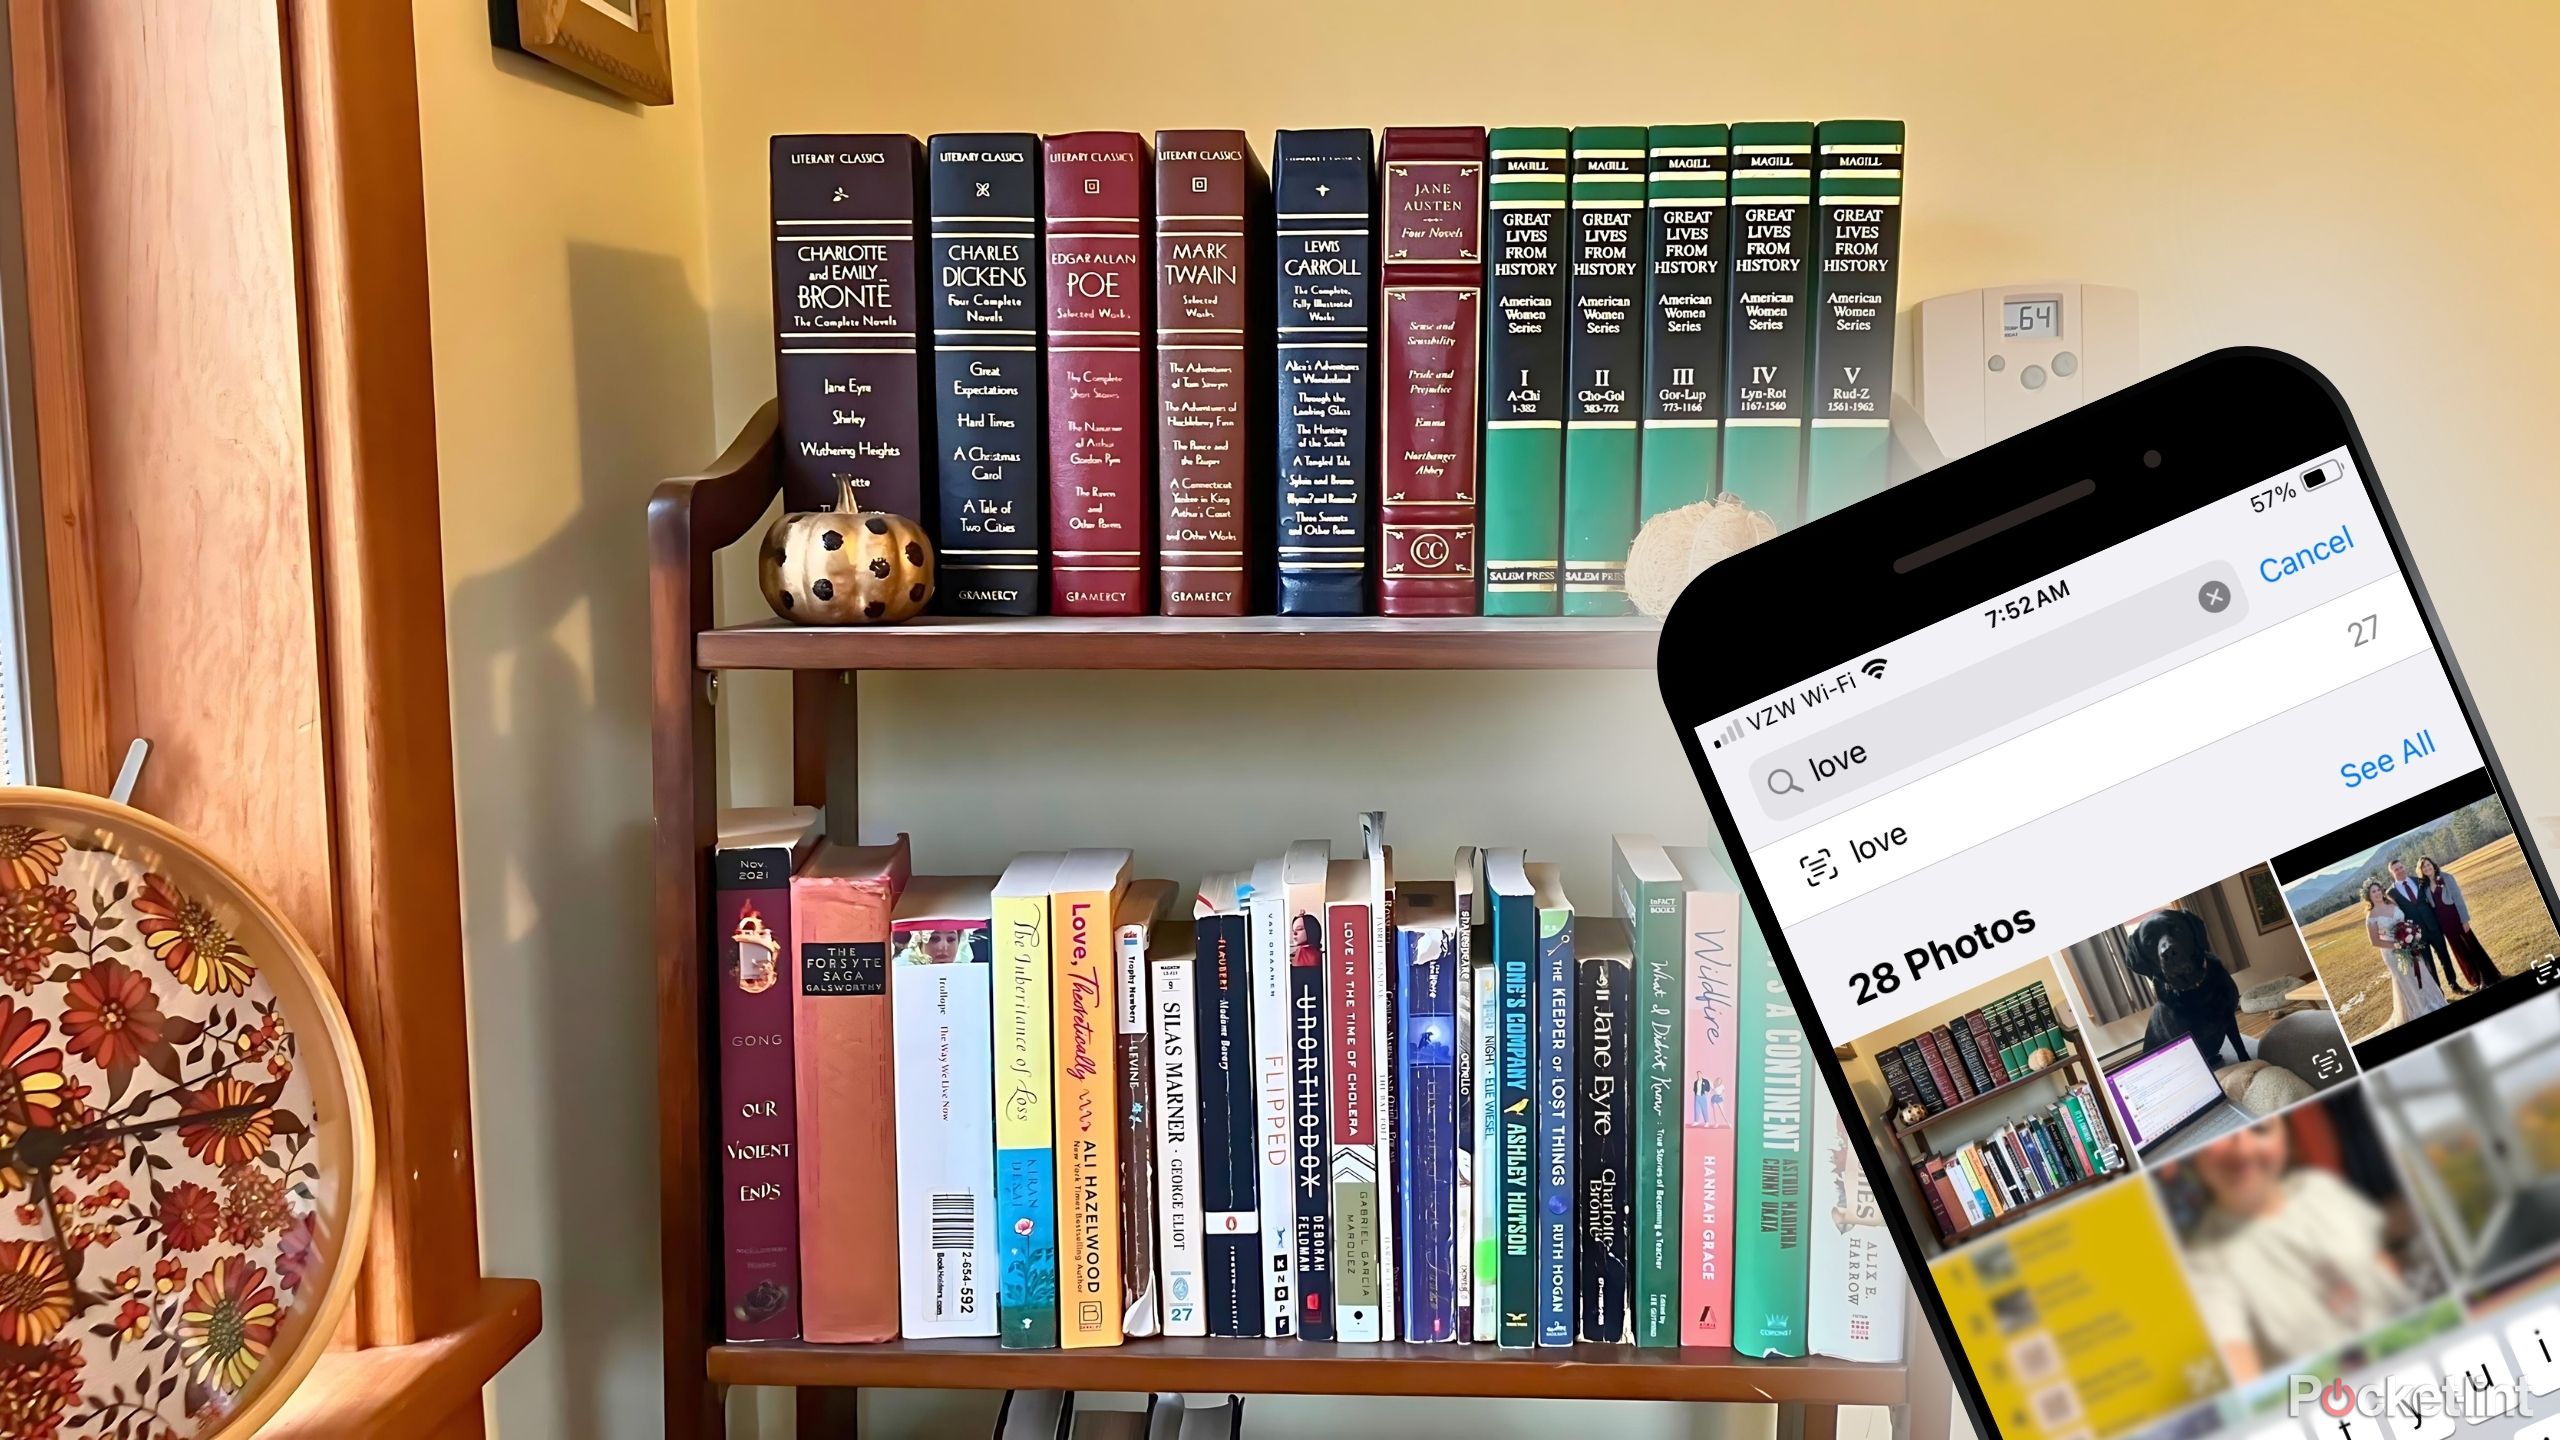 How to use an iPhone to locate books